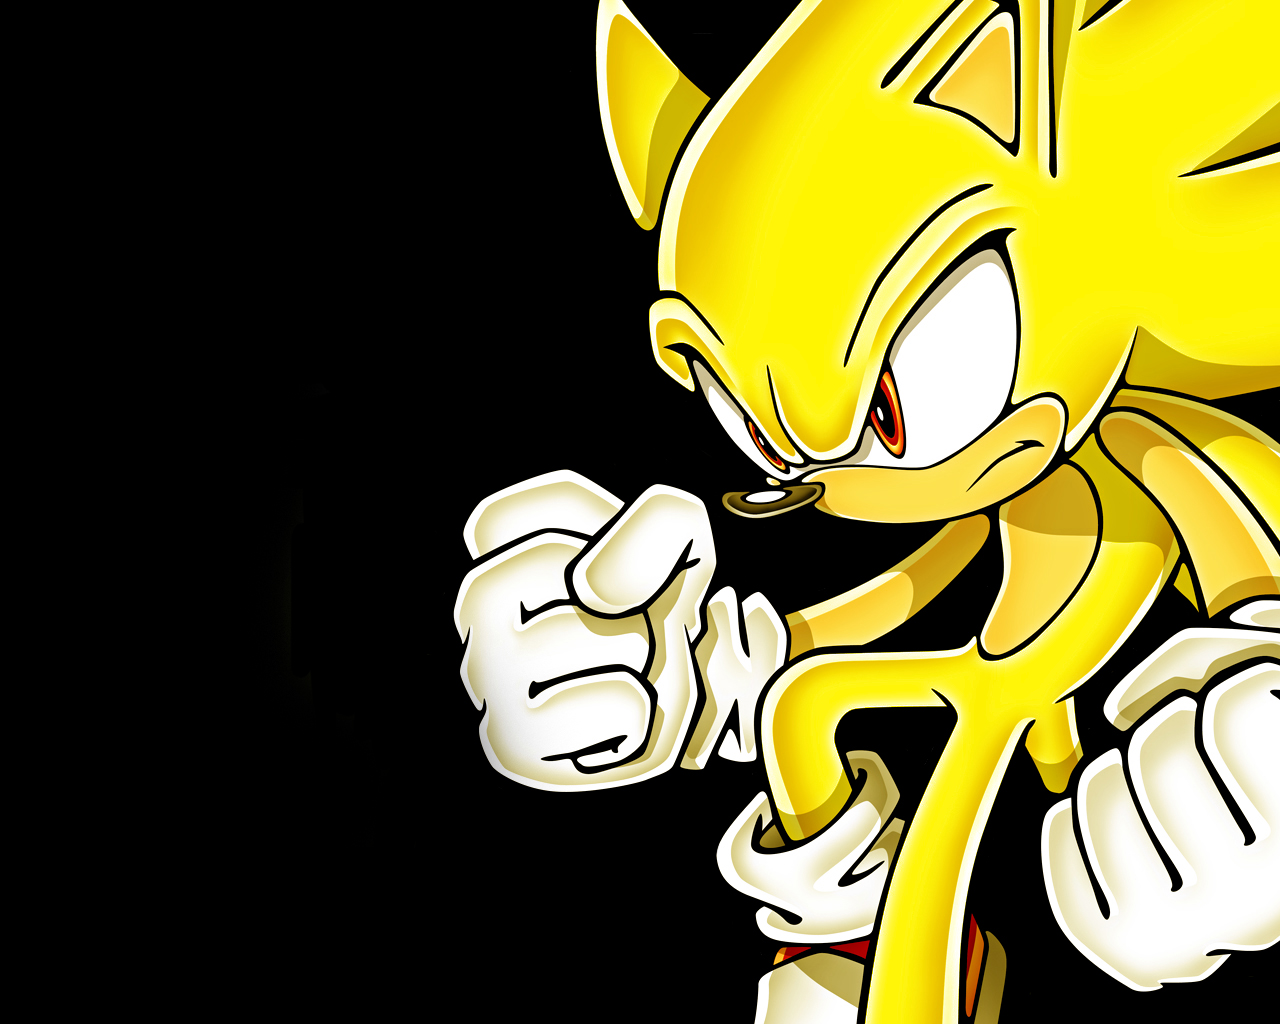 File Name 891488 Sonic The Hedgehog Wallpaper for PC Full HD